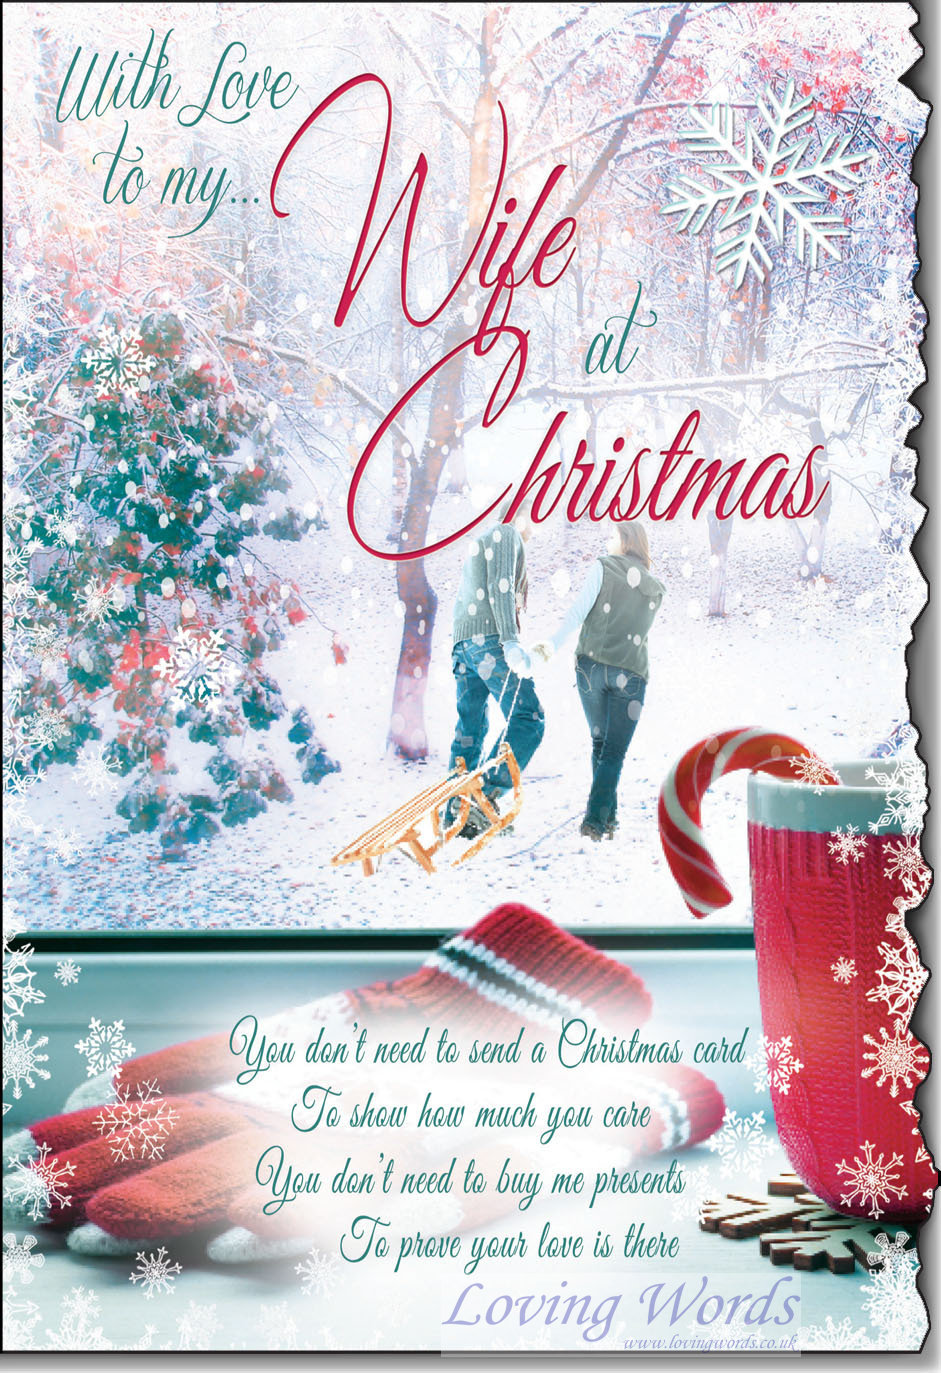 with-love-to-my-wife-at-christmas-greeting-cards-by-loving-words